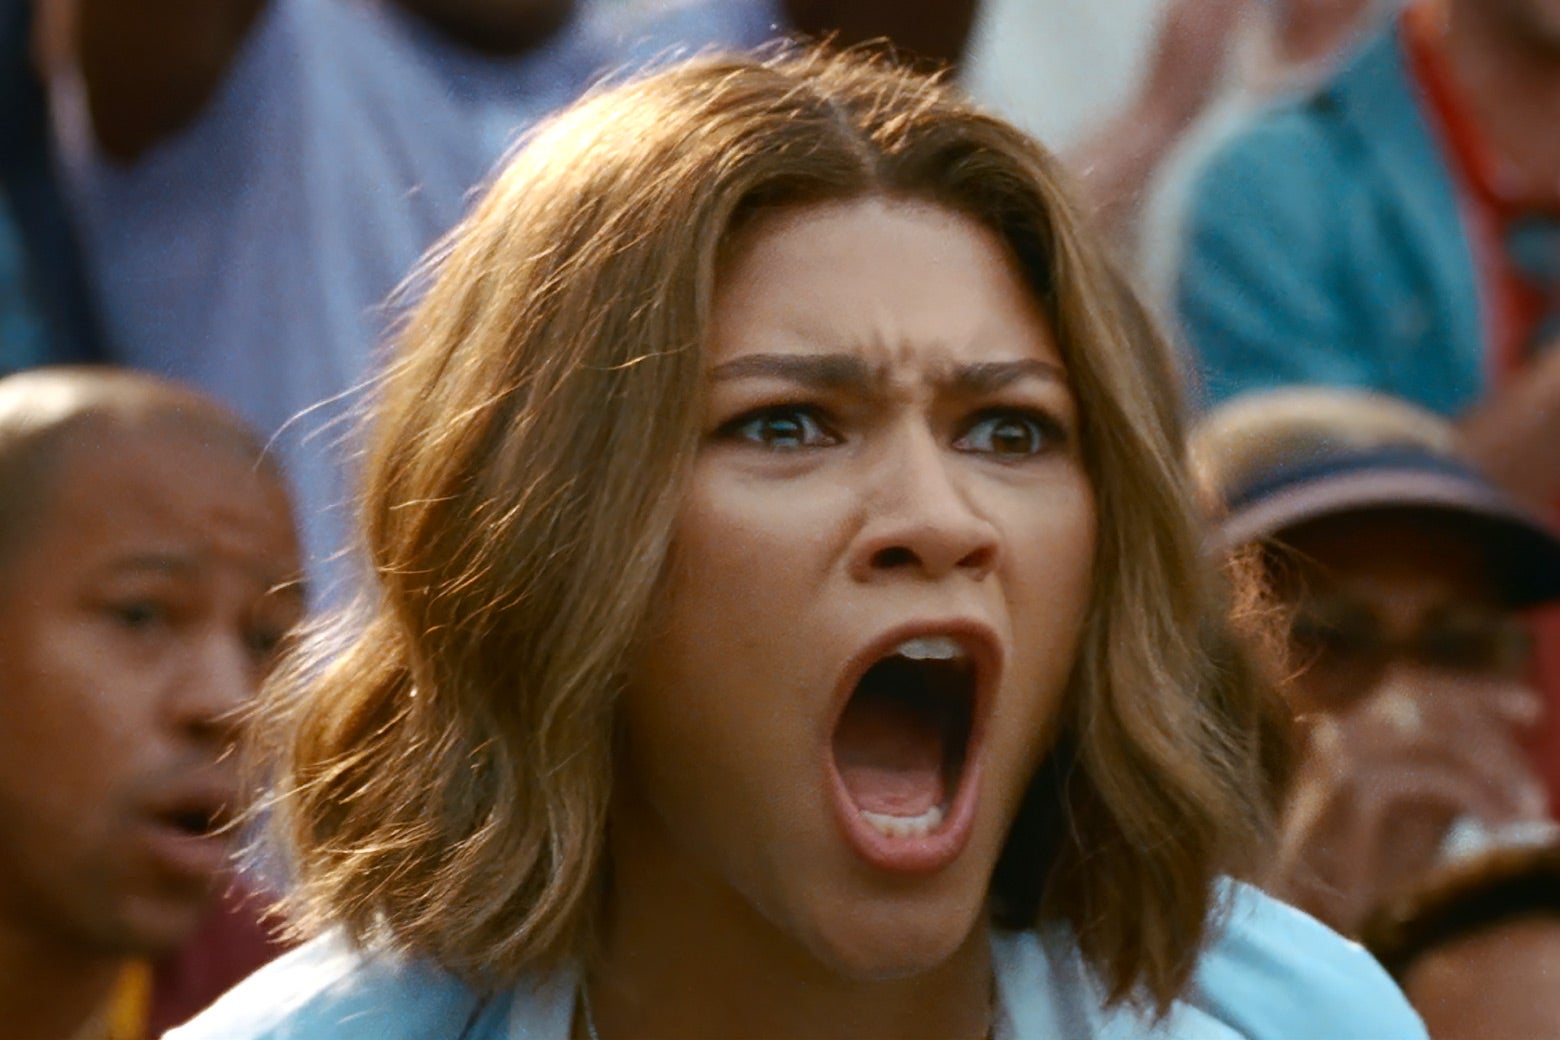 	
Zendaya screaming at a tennis match in the movie Challengers.